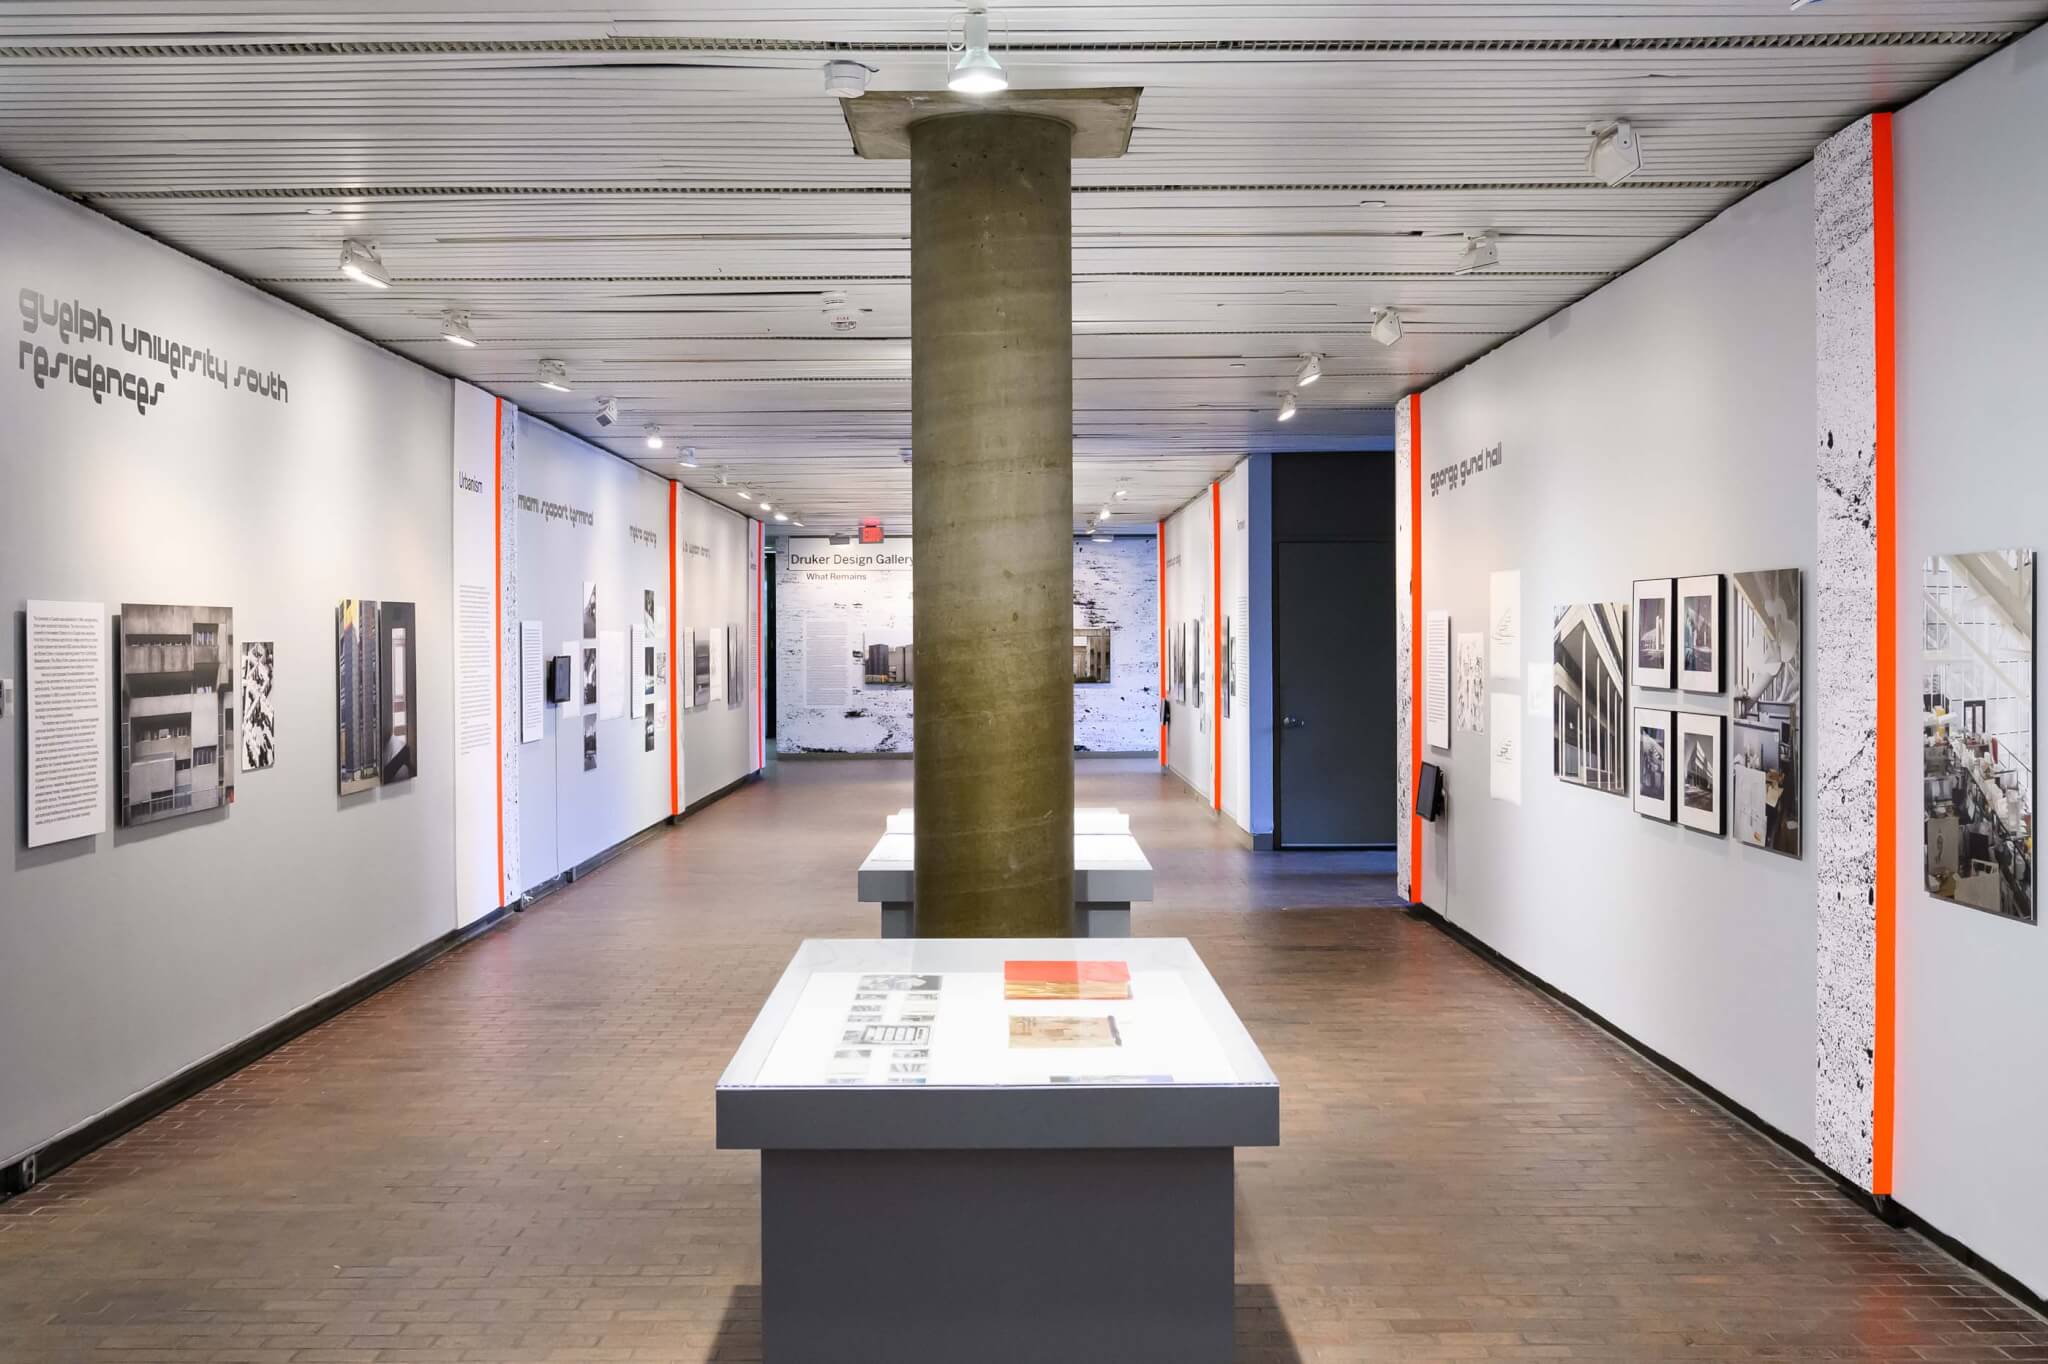 gund hall interior with show and structural column